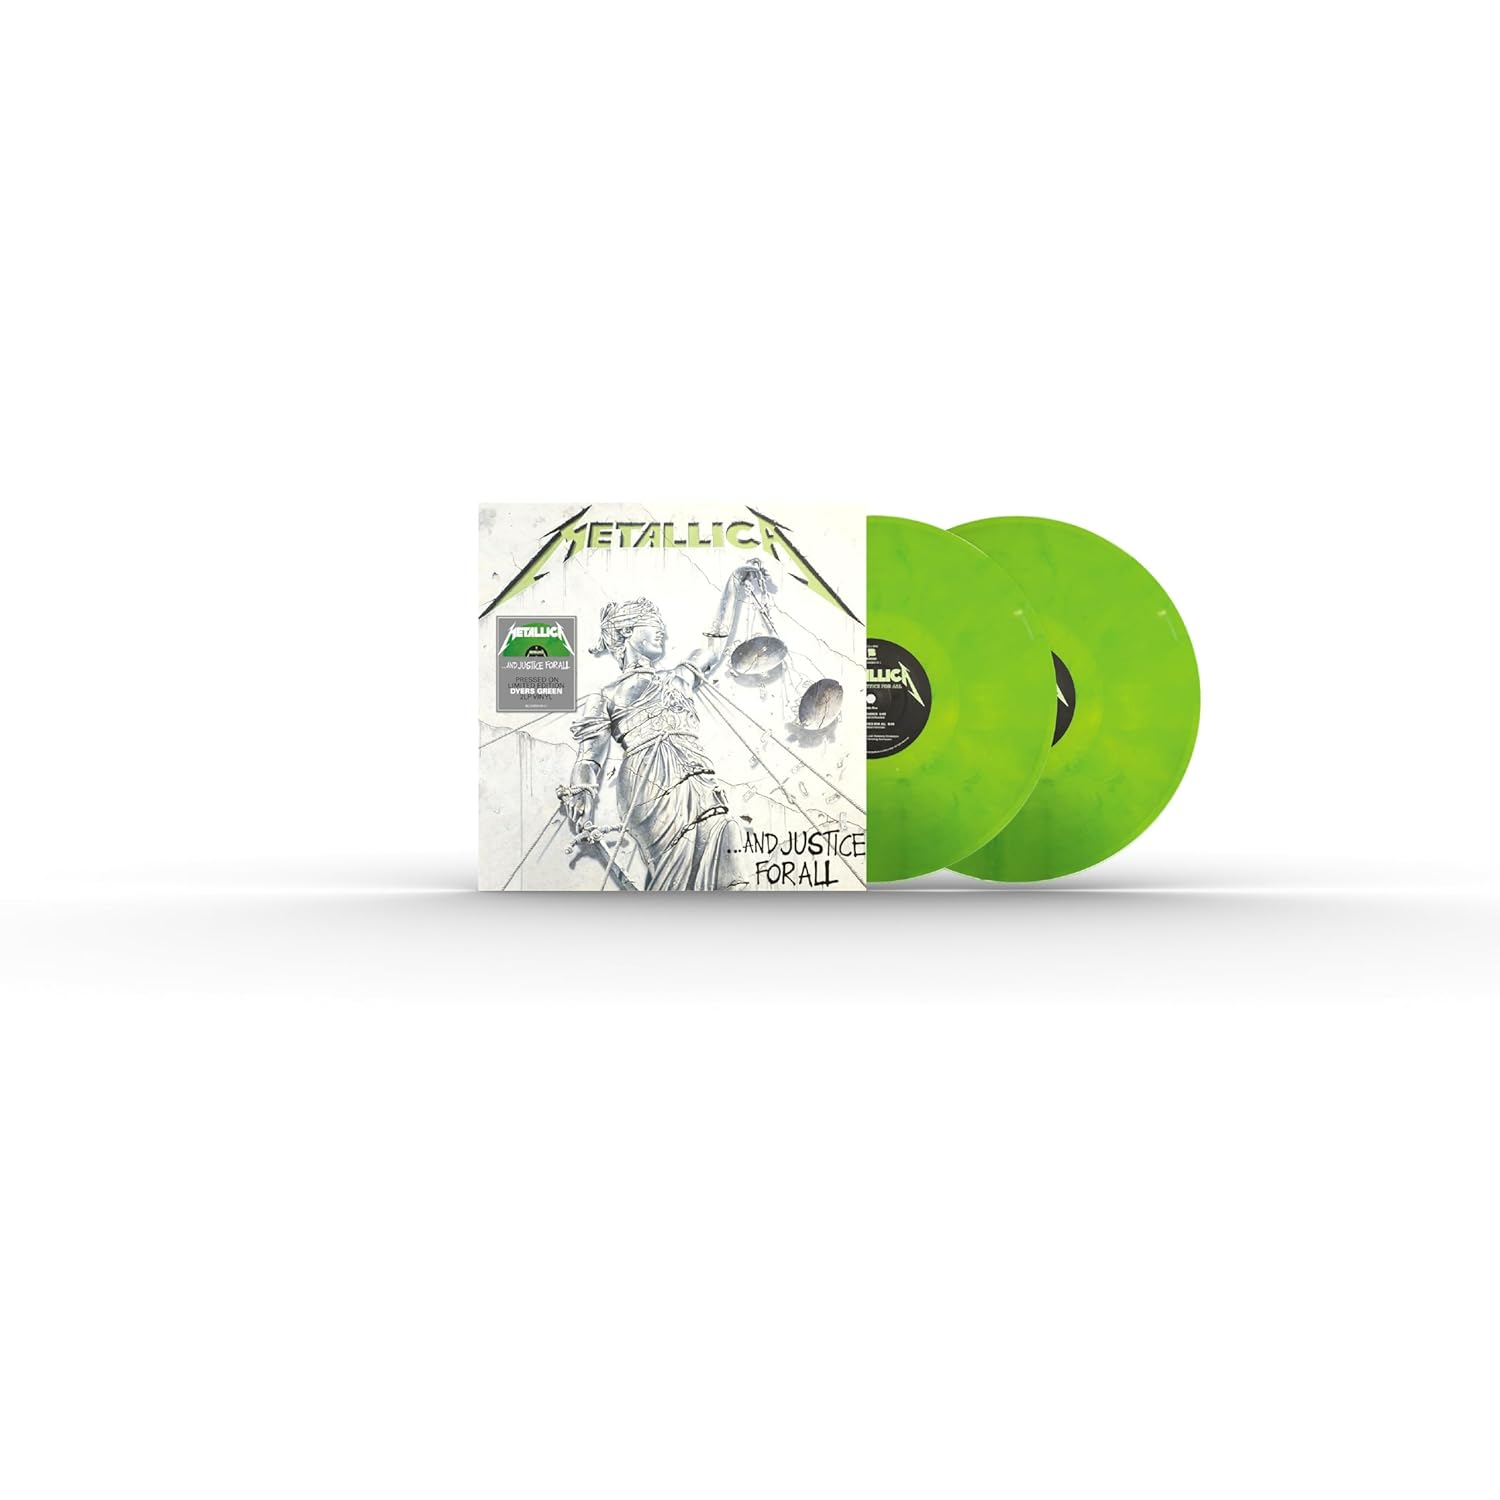 ...And Justice For All (DYERS GREEN Vinyl)